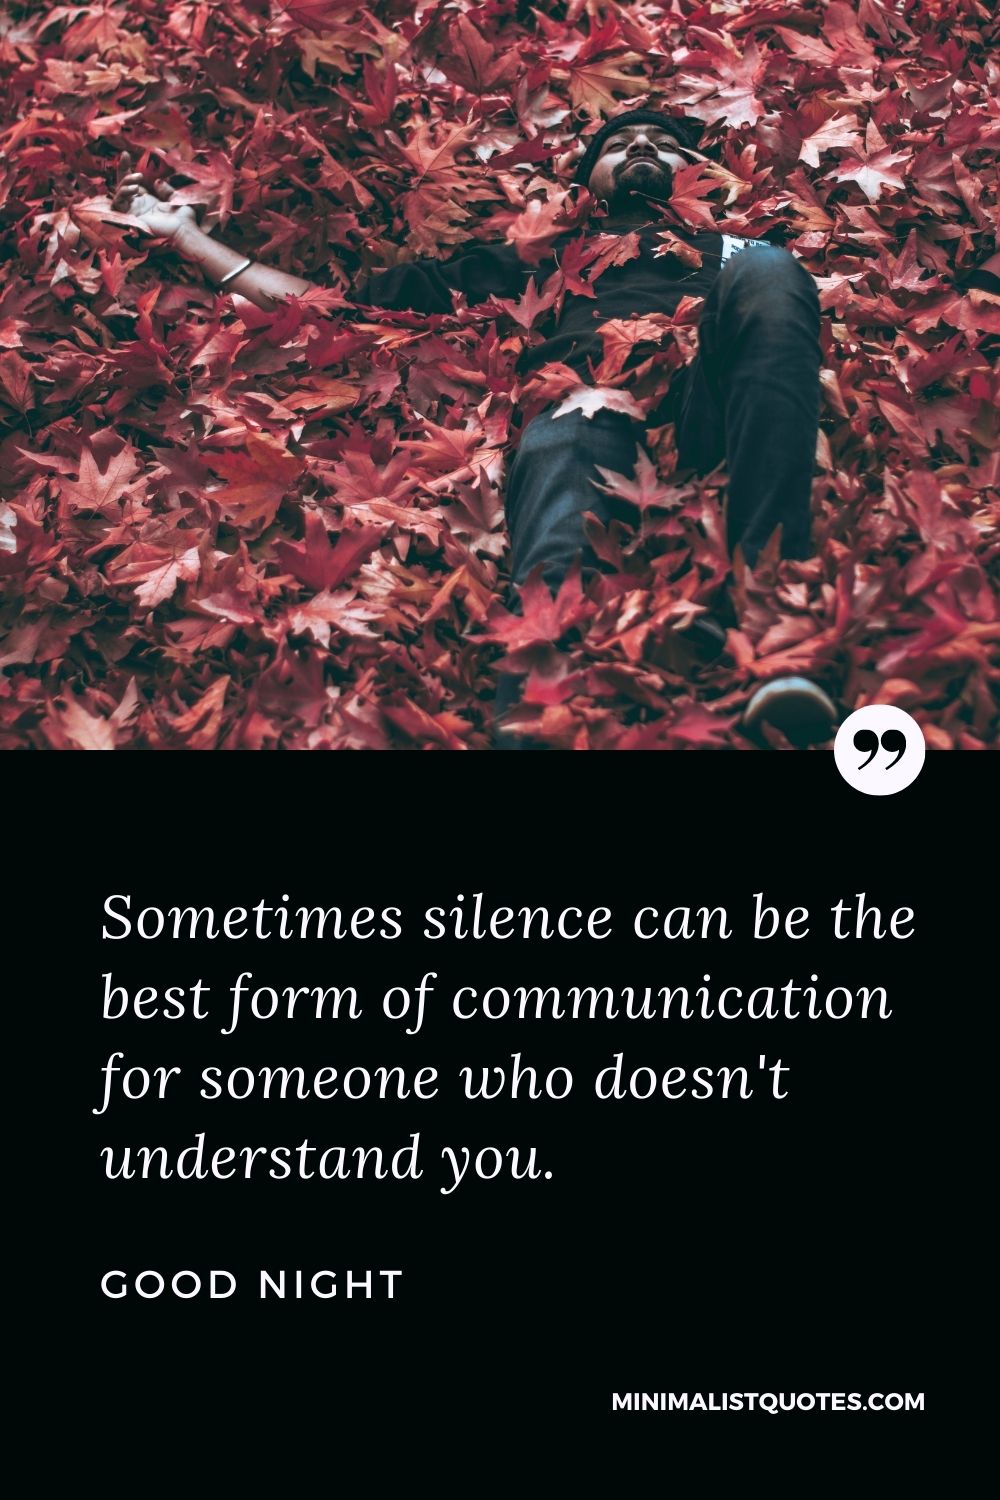 Good Night Wish & Message With Image: Sometimes silence can be the best form of communication for someone who doesn't understand you.